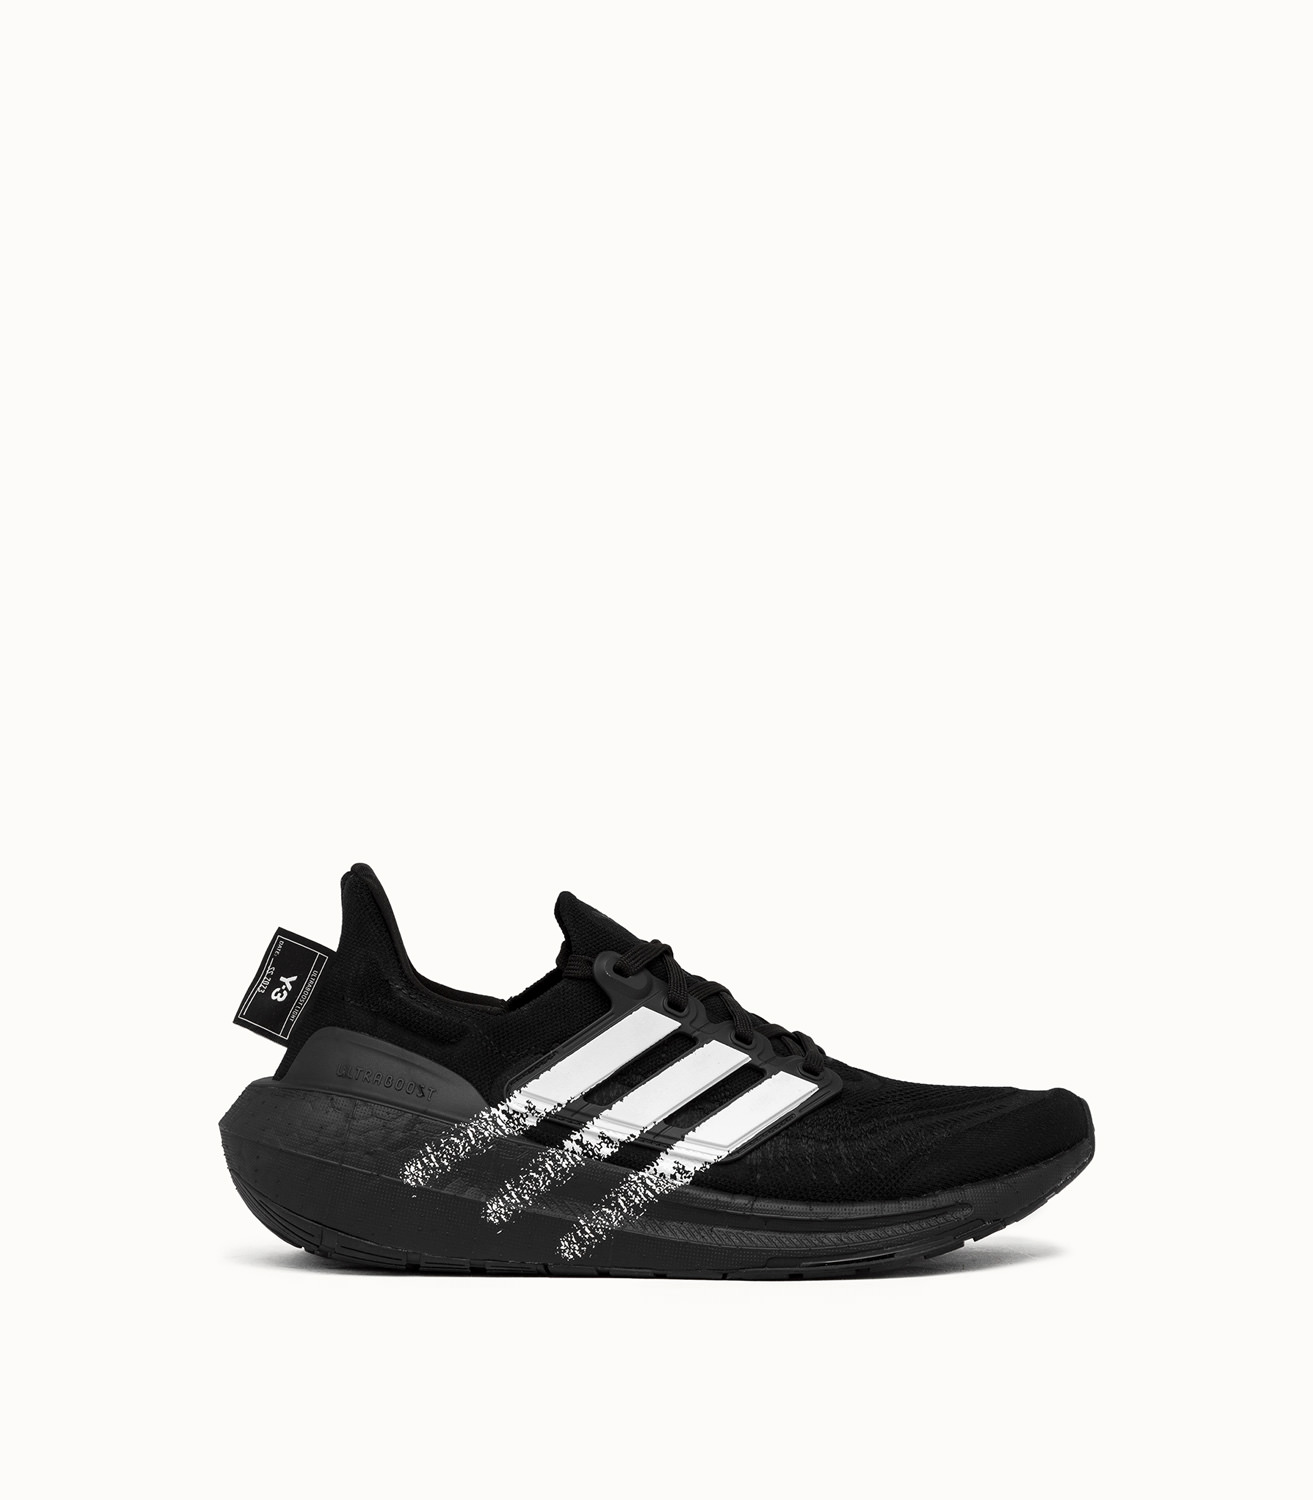 ADIDAS Y-3 LIGHT SNEAKERS COLOR BLACK | Playground